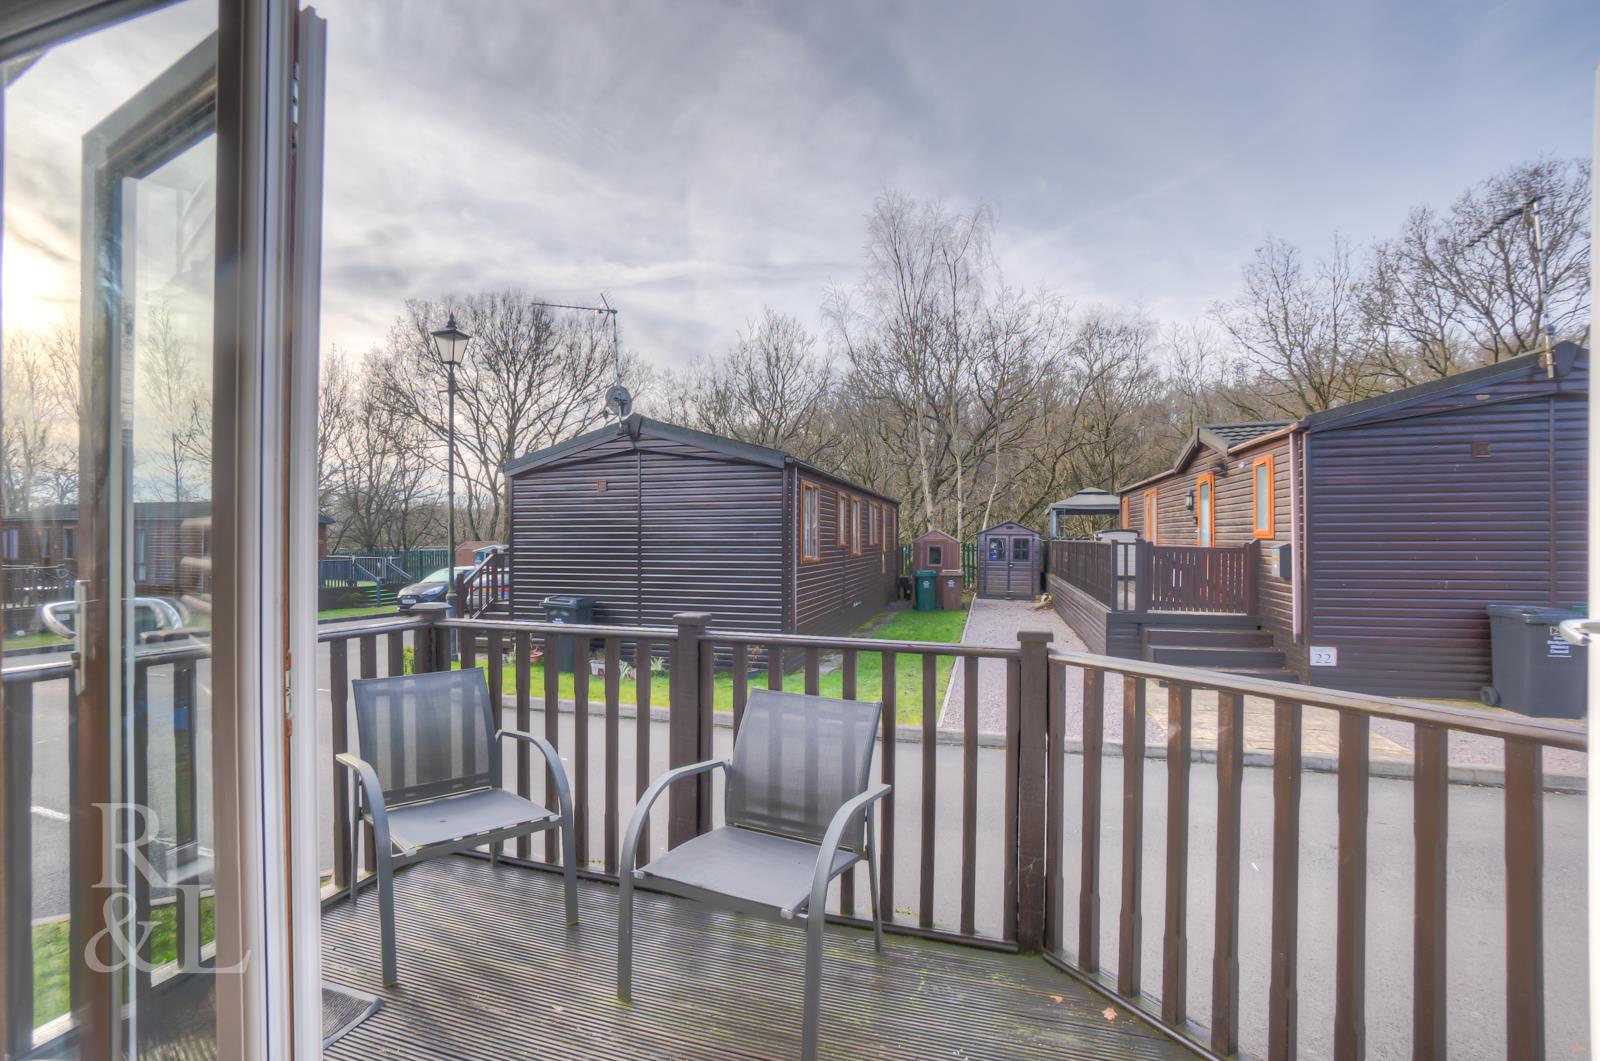 Property image for Swainswood Luxury Lodges, Park Road, Overseal, Swadlincote